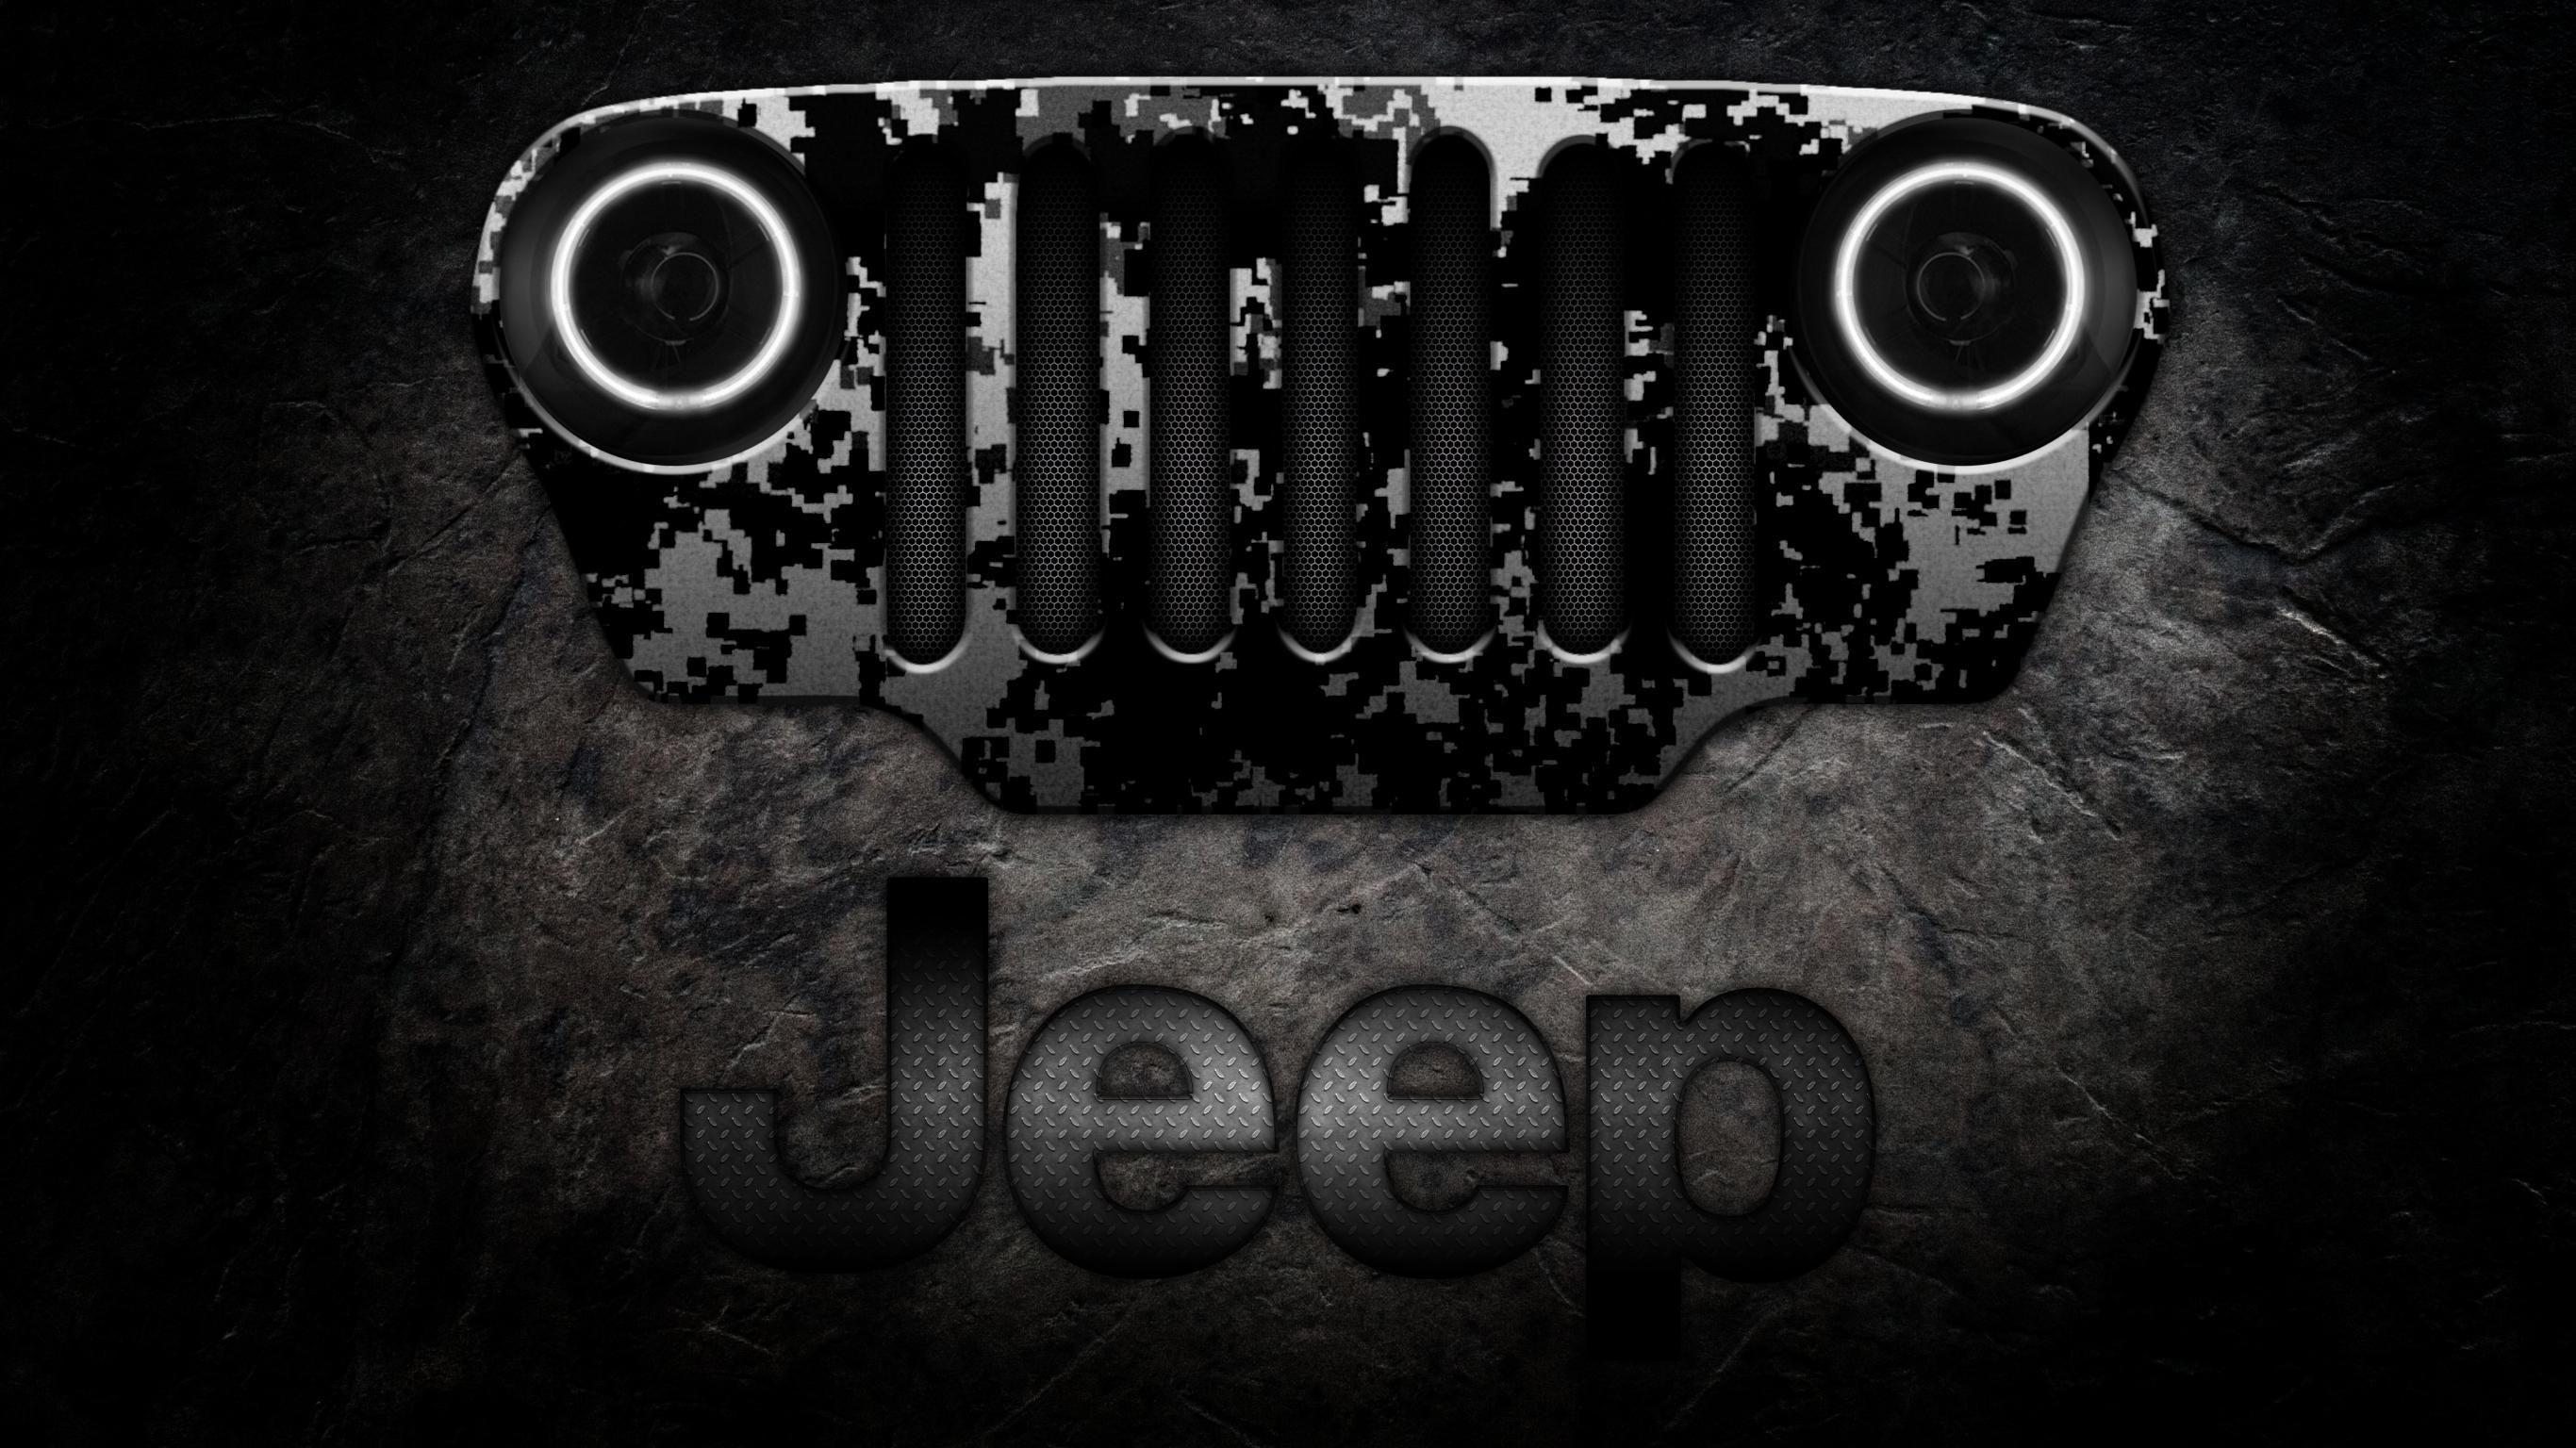 Funny Jeep Logo - Jeep Logo Wallpapers - Wallpaper Cave | Jeep Wallpapers | Jeep, Jeep ...